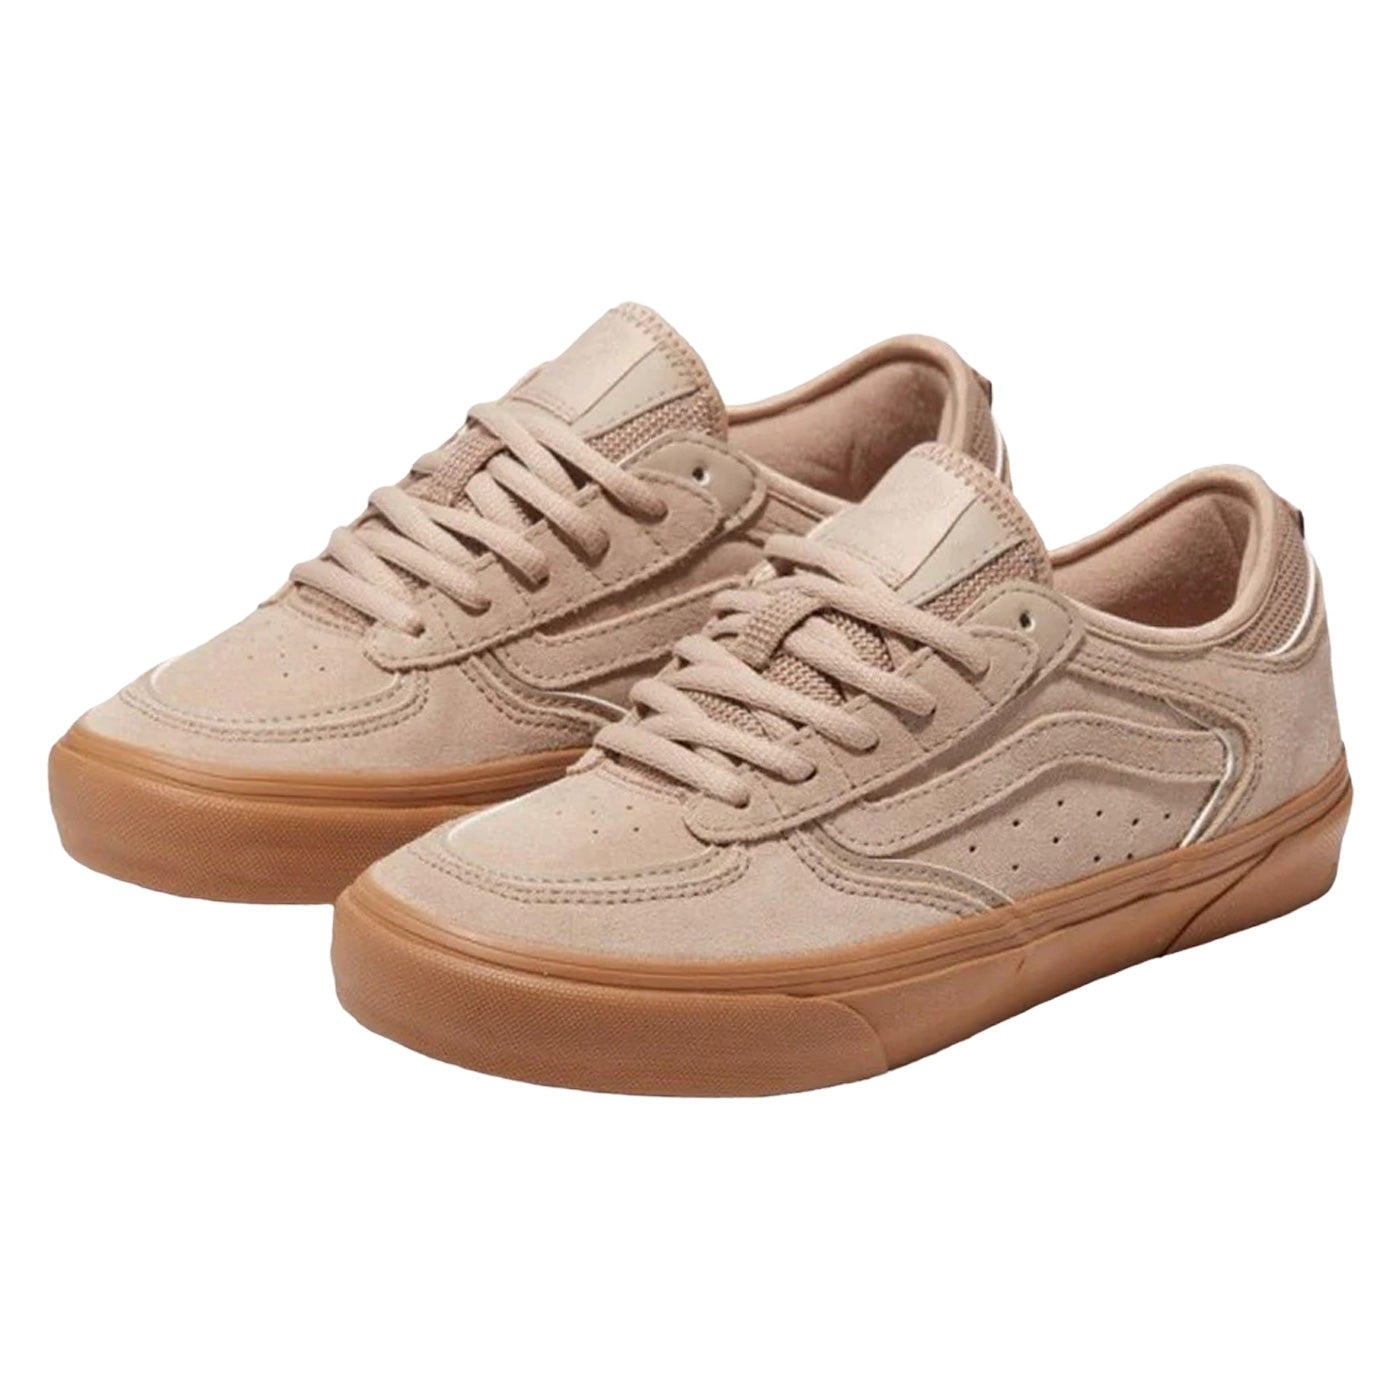 Salmon pink Rowley Vans low top laced skate shoes with gum sole. Free uk shipping over £50